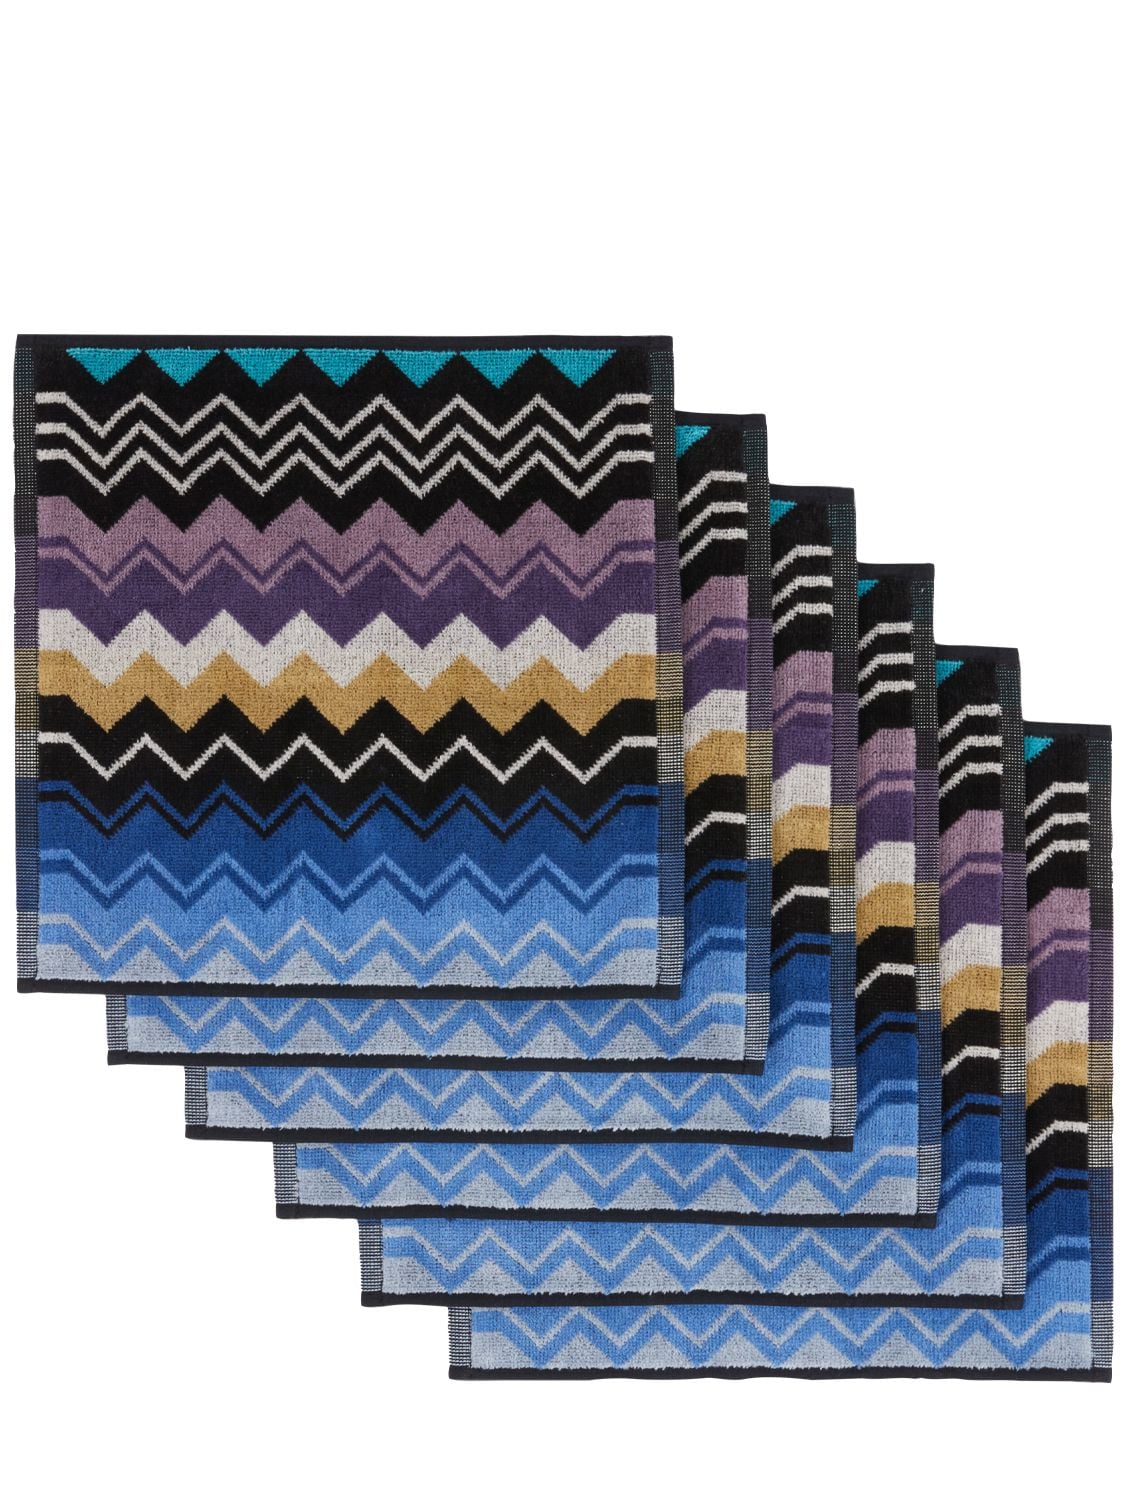 Missoni Home Collection Giacomo Set Of 6 Cotton Hand Towels In Multicolor